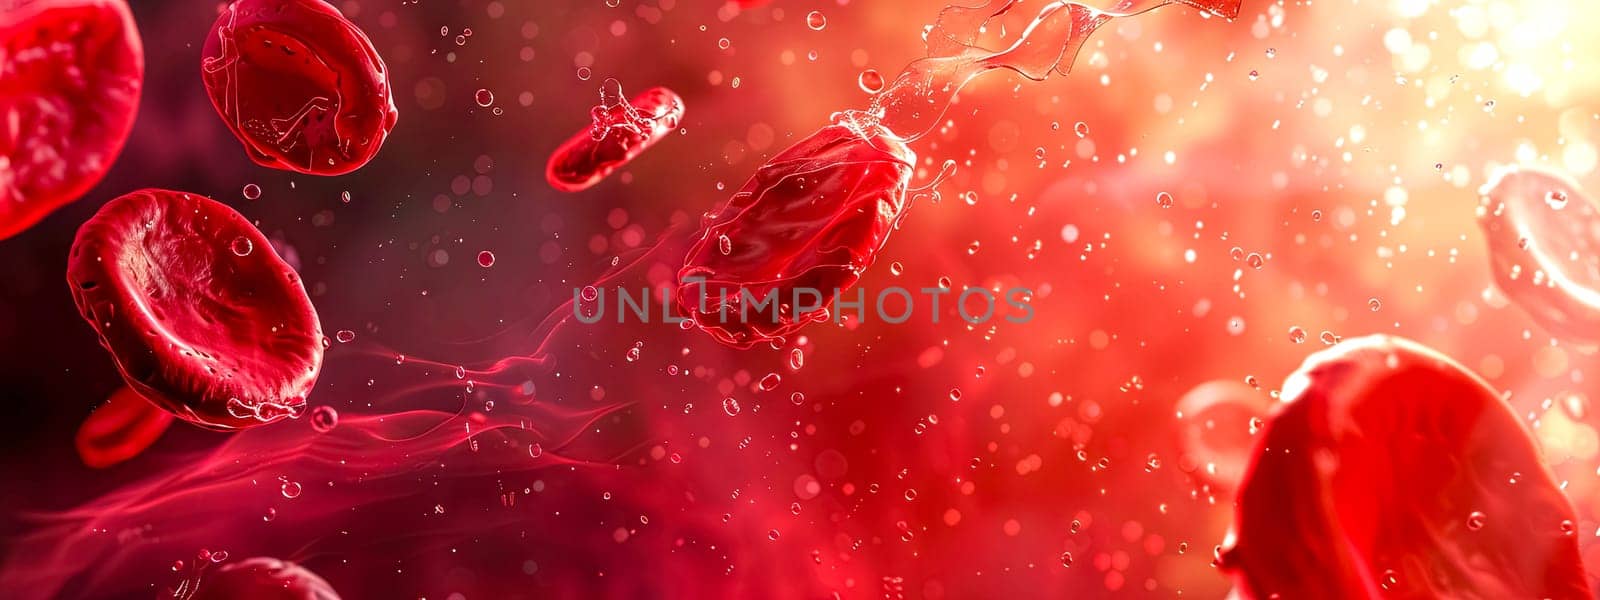 Artistic rendition of red blood cells traveling through the bloodstream